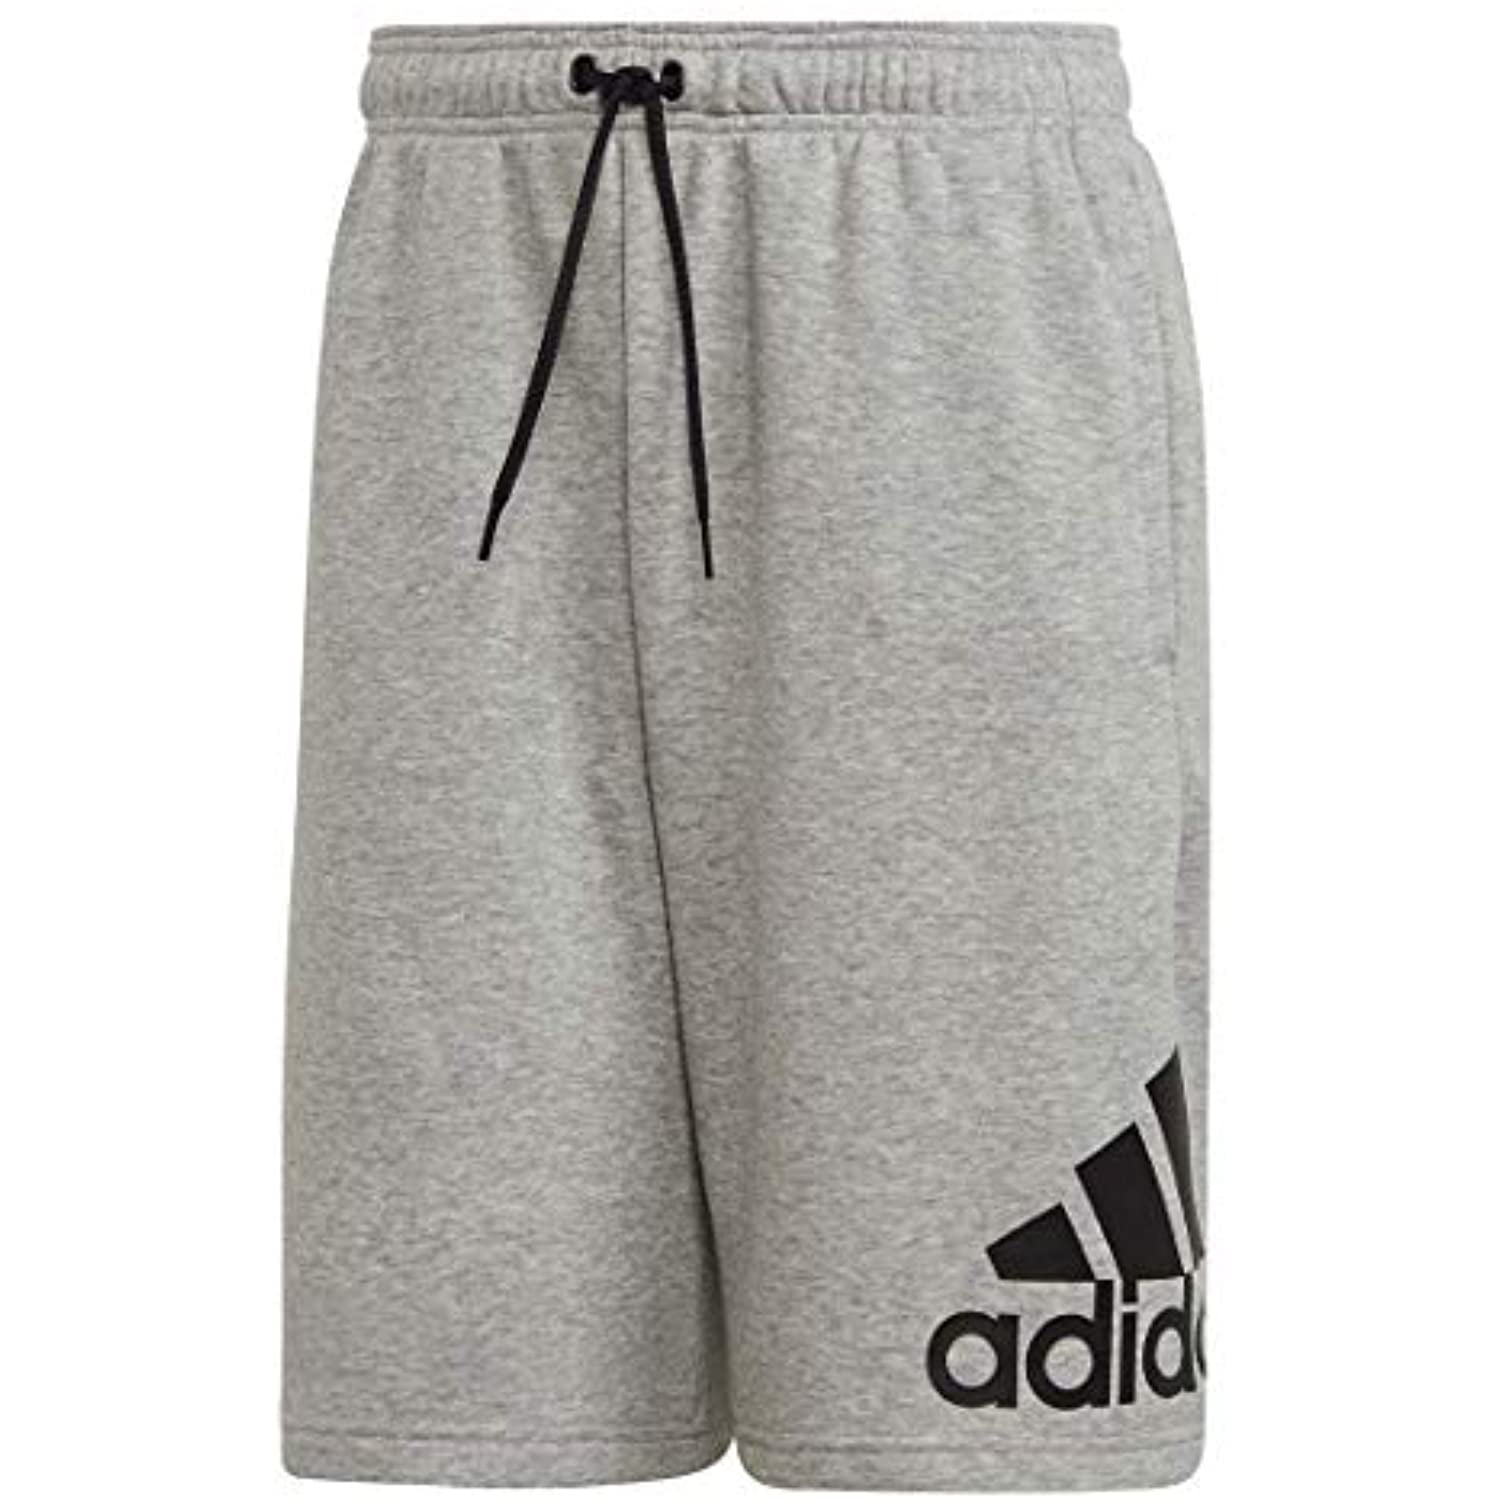 French Badge Shorts, Haves Men\'s Medium X-Small adidas Must Terry of Grey Heather, Sport